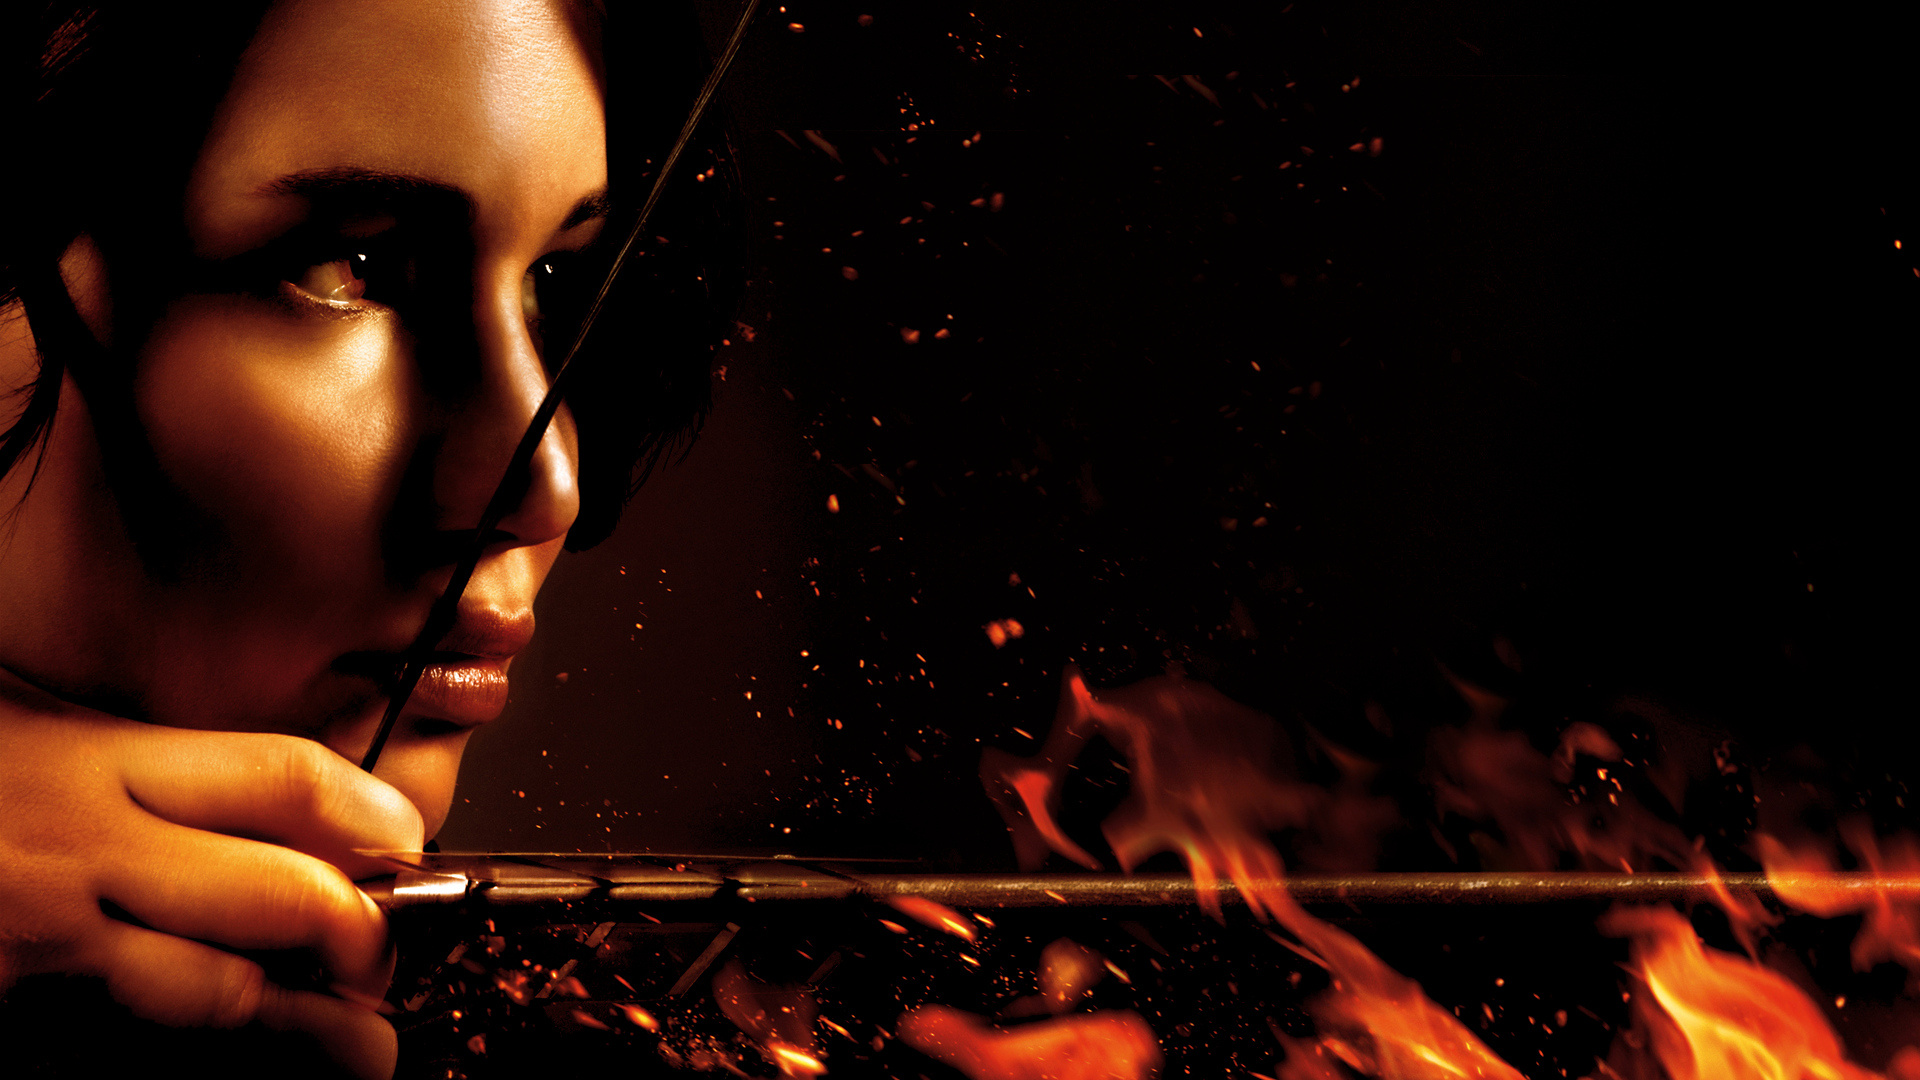 Hunger Games: The film grossed over $694 million worldwide against its budget of $78 million. 1920x1080 Full HD Wallpaper.